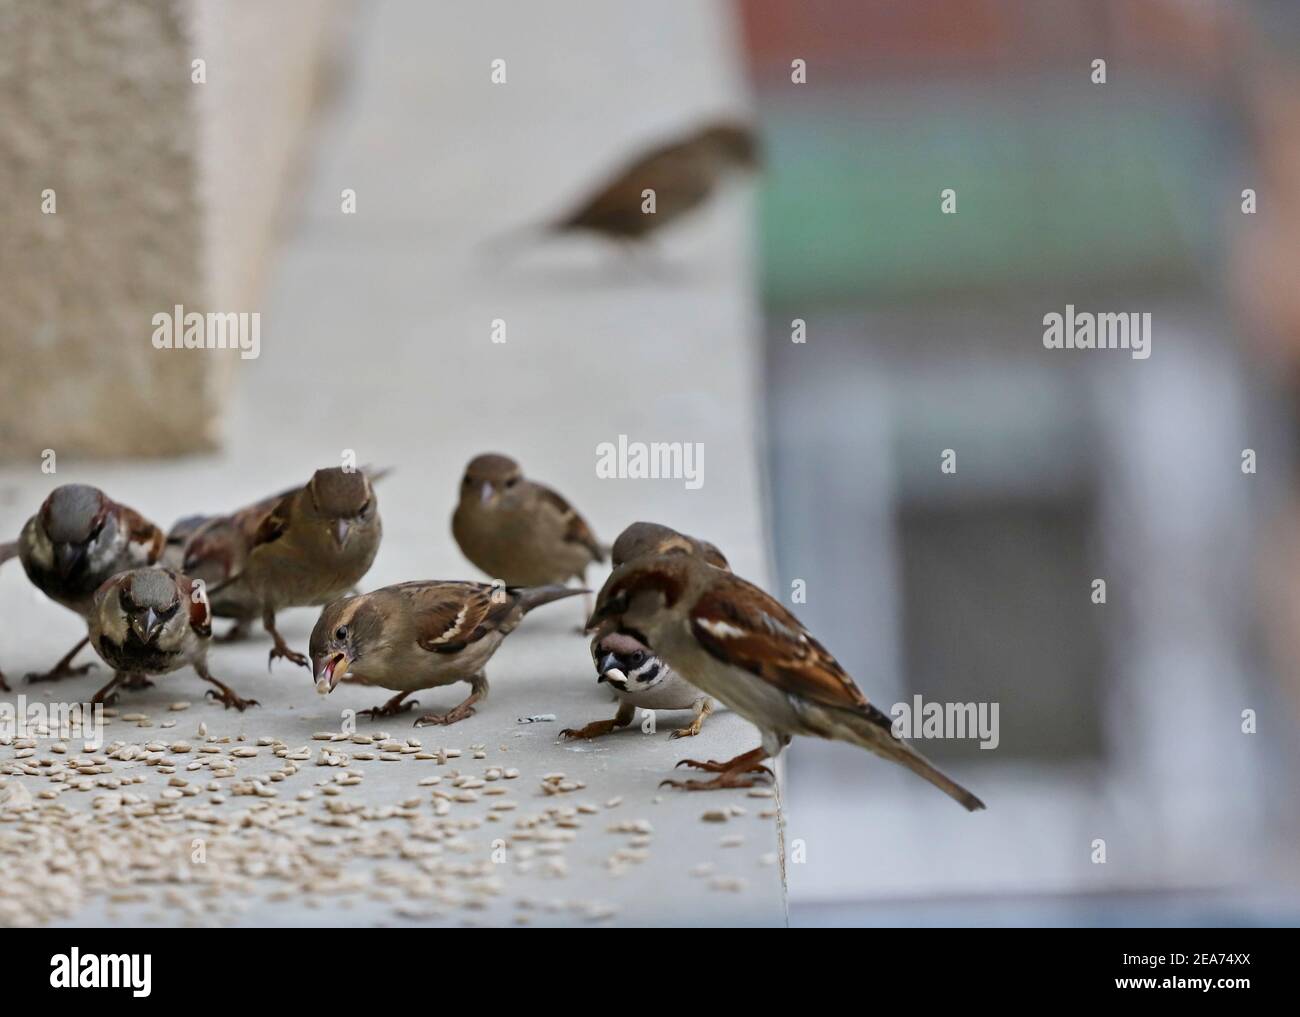 A flock of sparrows eat seeds on the railing. Flying sparrows. Stock Photo